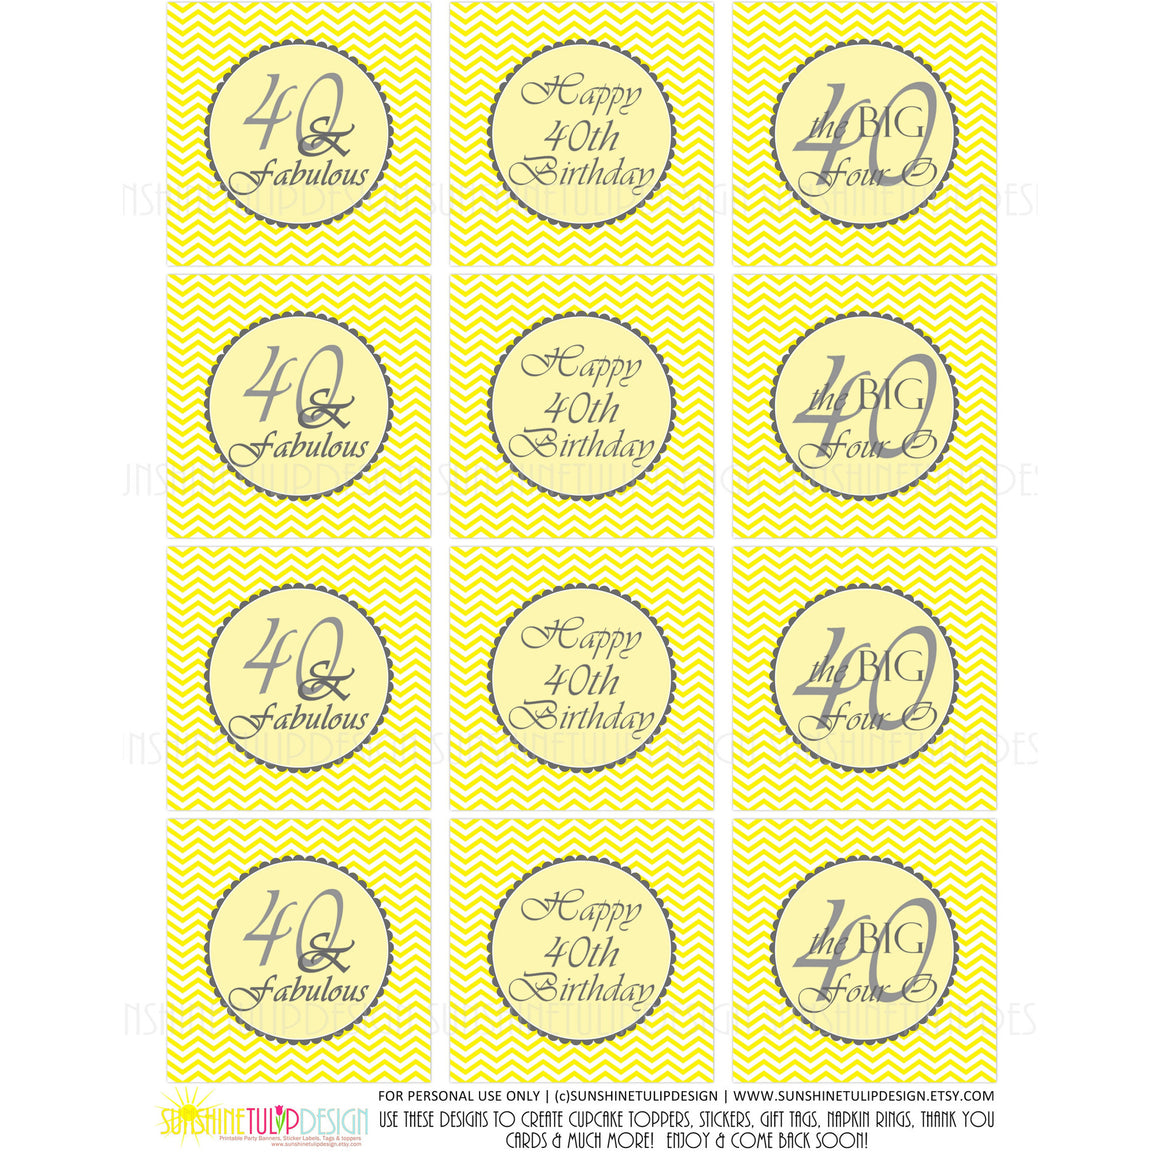 Printable 40 and Fabulous Yellow & Gray Birthday Cupcake Toppers, Sticker Labels & Party Favor Tags - Sunshinetulipdesign